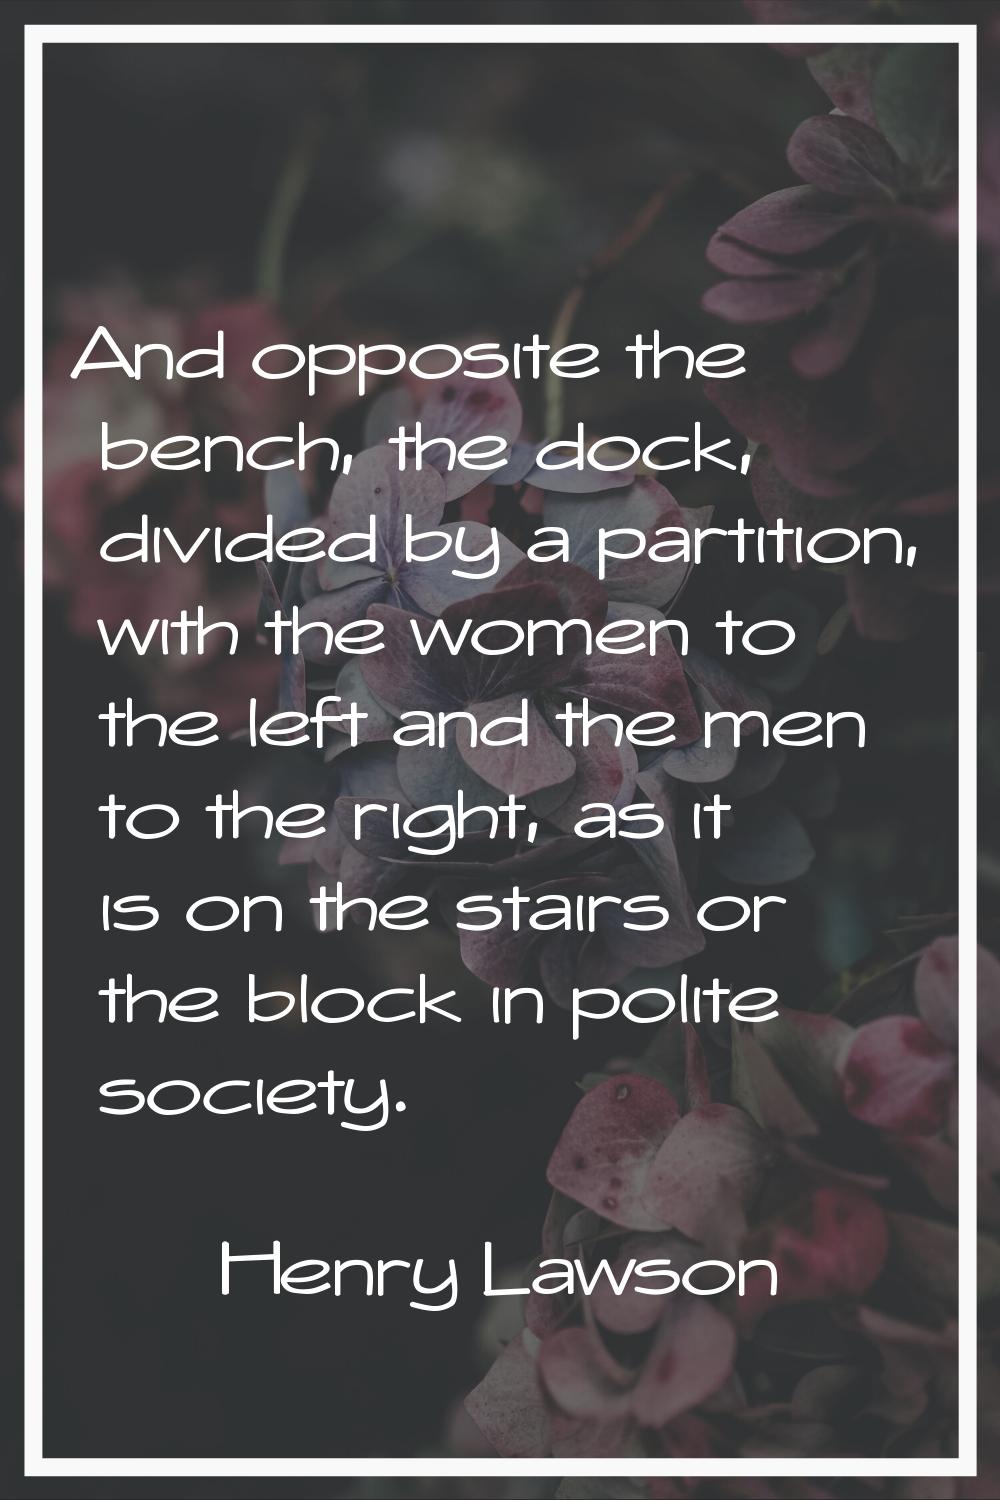 And opposite the bench, the dock, divided by a partition, with the women to the left and the men to